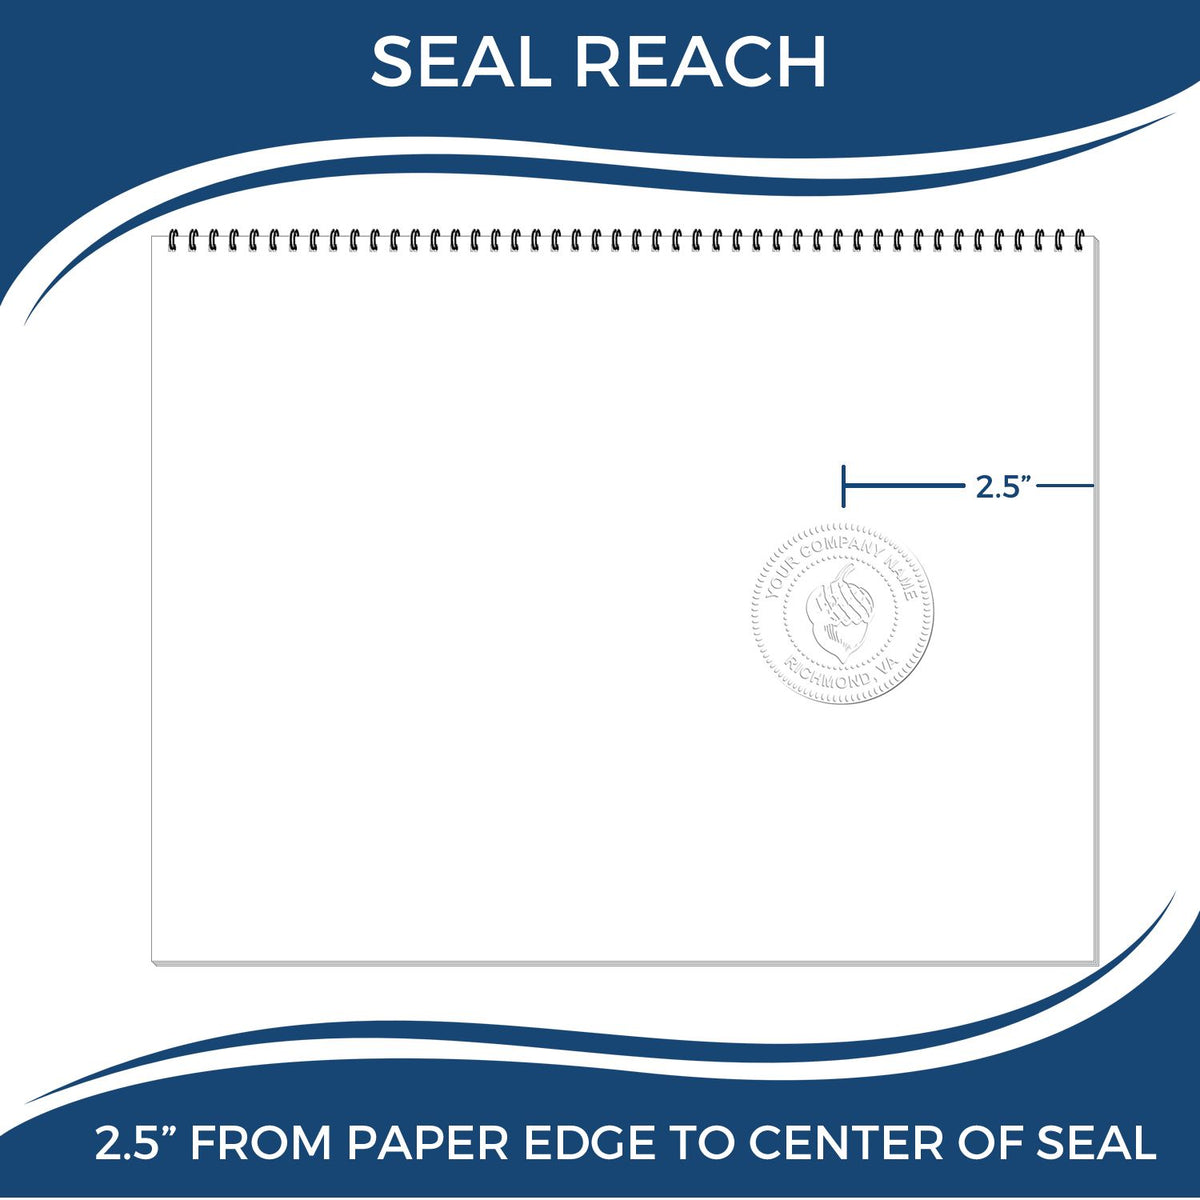 An infographic showing the seal reach which is represented by a ruler and a miniature seal image of the Heavy Duty Cast Iron West Virginia Engineer Seal Embosser